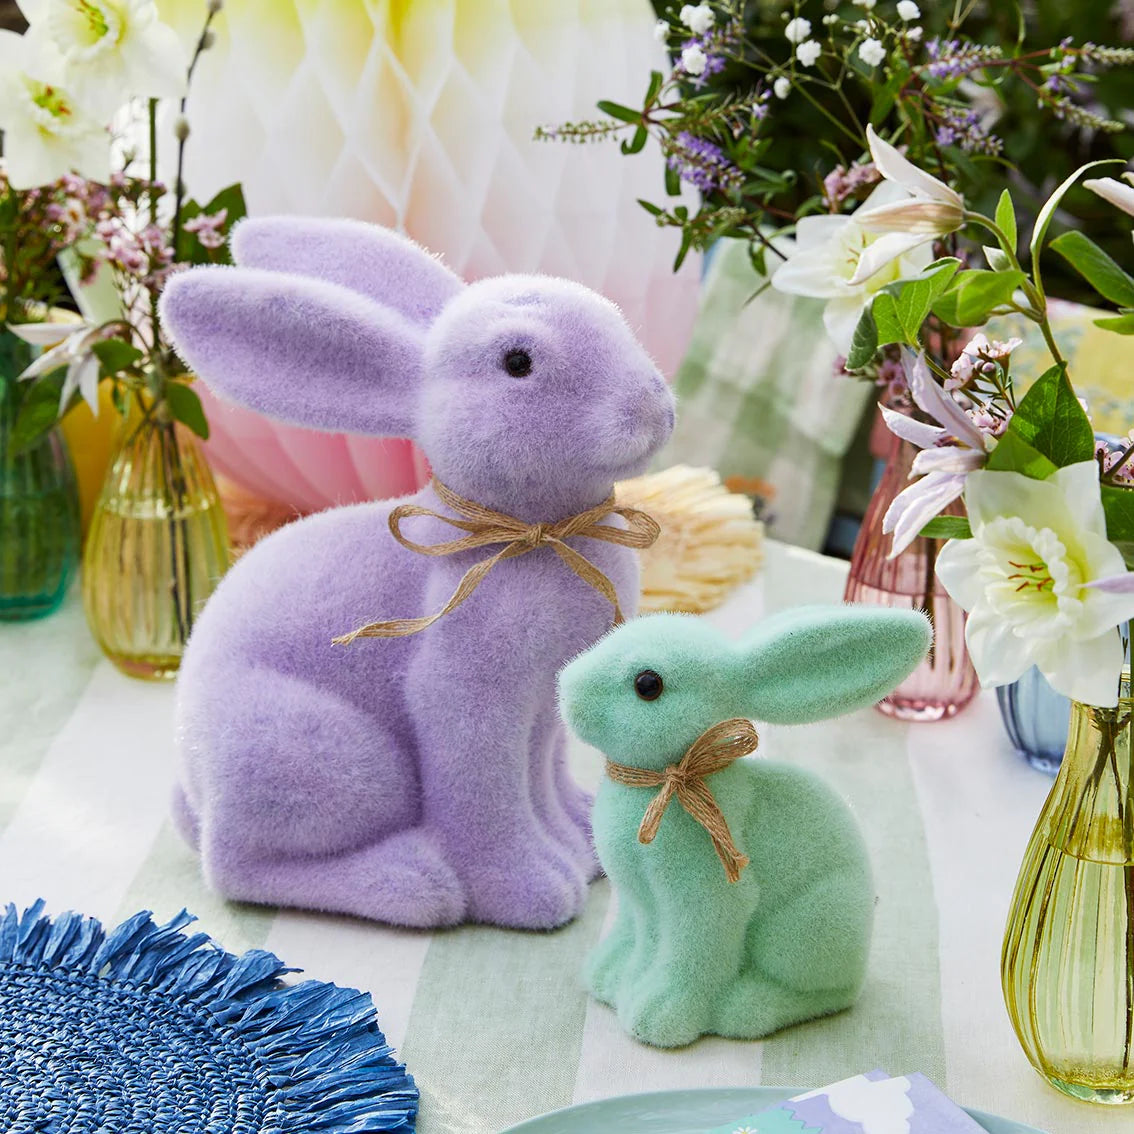 DECORATE FOR EASTER